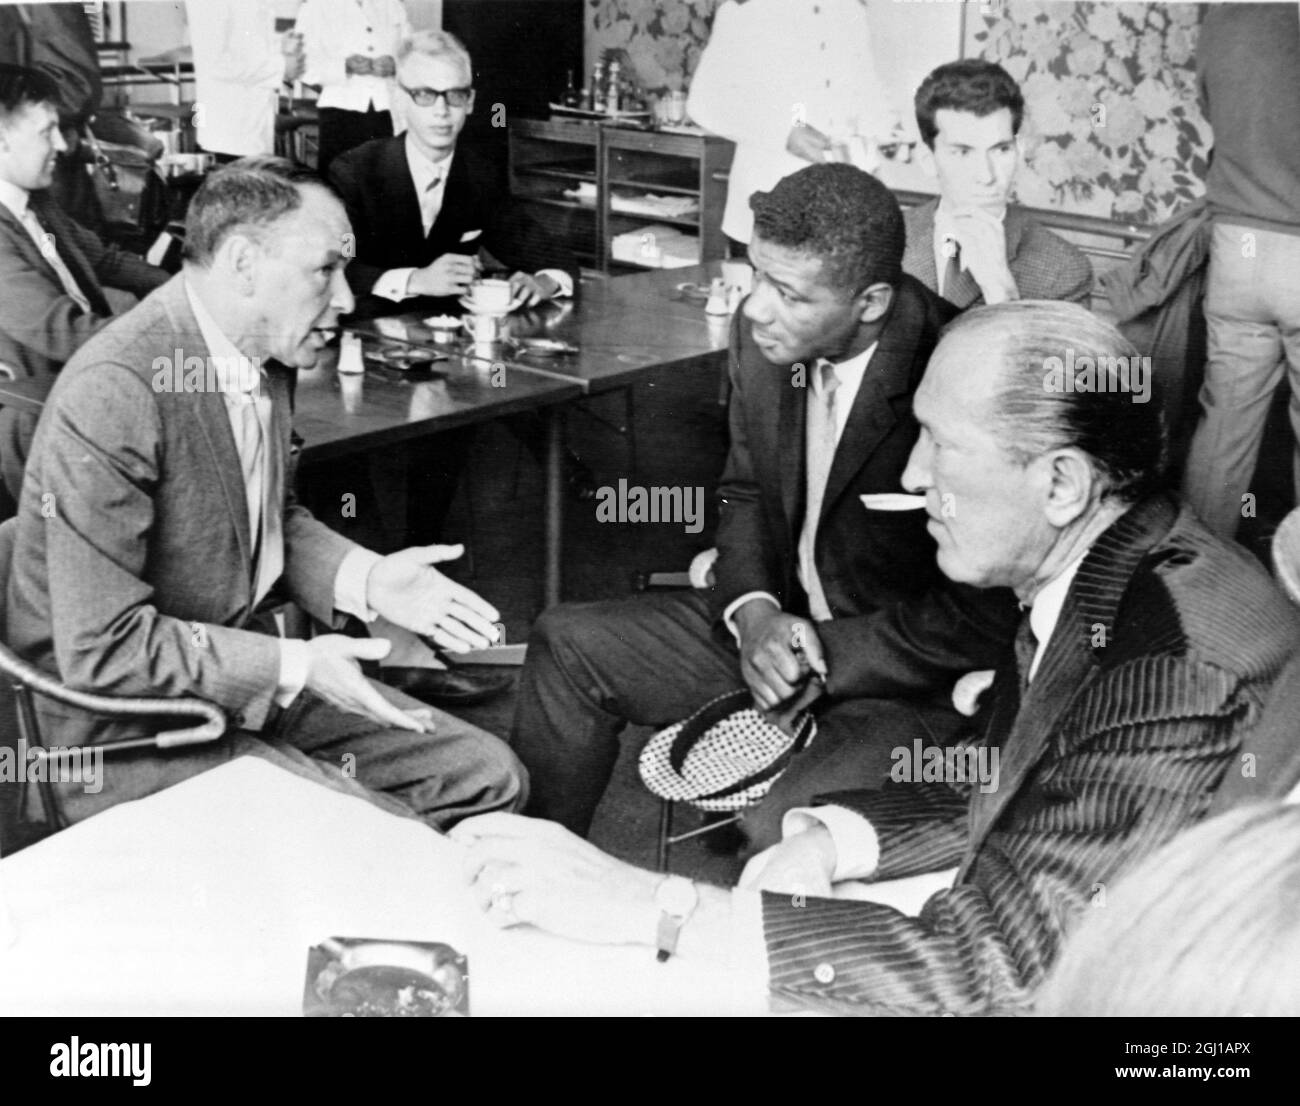 BOXING FLOYD PATTERSON AND FRANK SINATRA CHAT AT GRAND HOTEL IN STOCKHOLM, SWEDEN ; 6 JULY 1964 Stock Photo